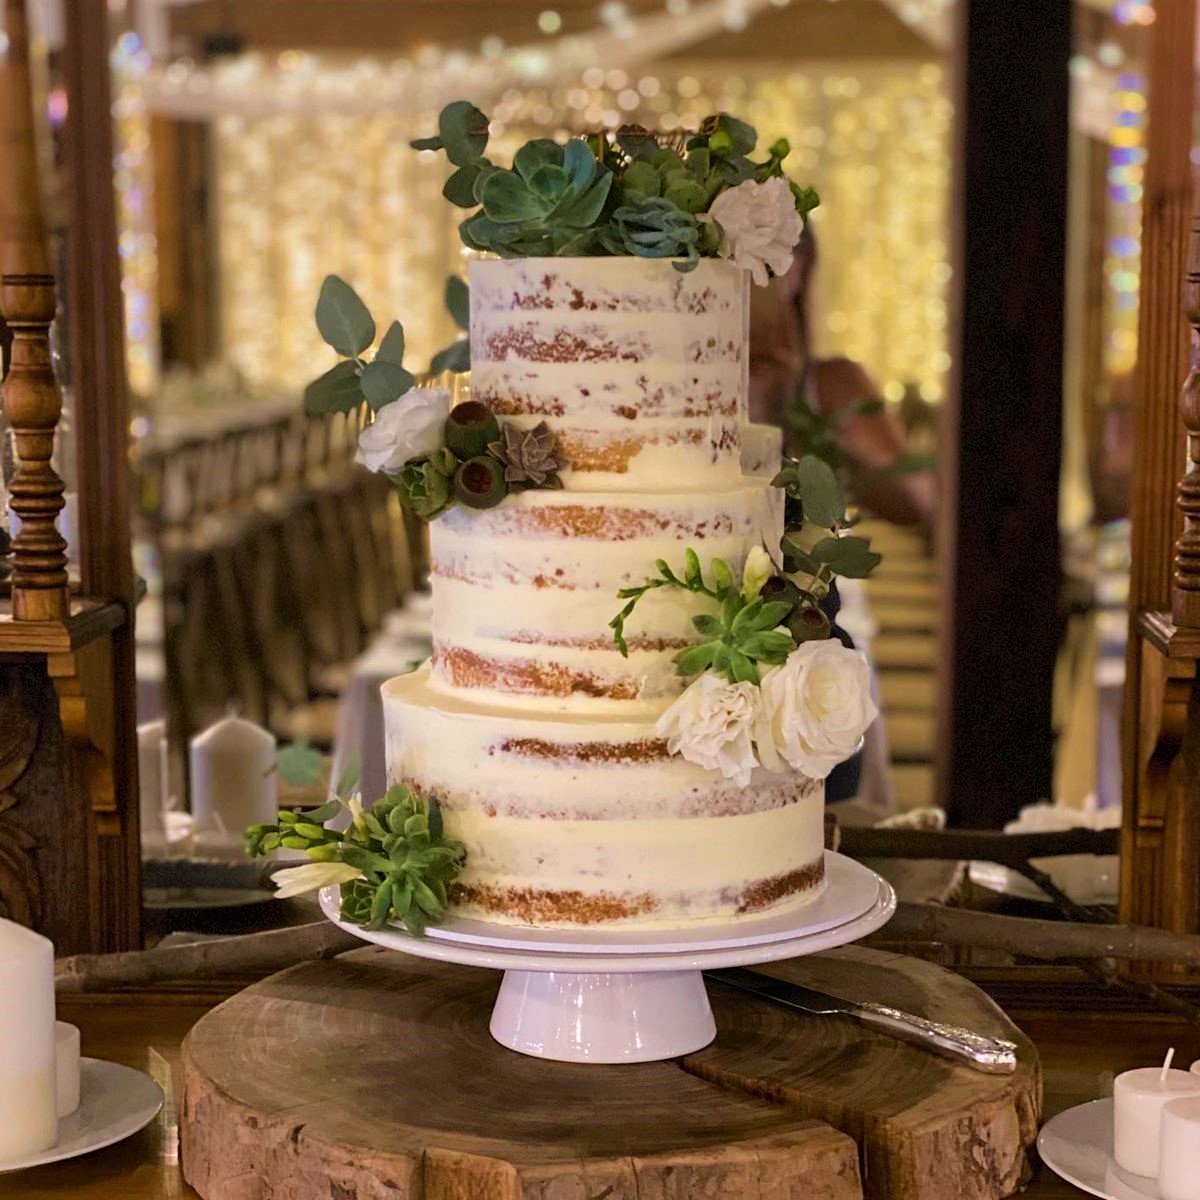 Rustic naked wedding cake from Elaine's Cakes Melbourne